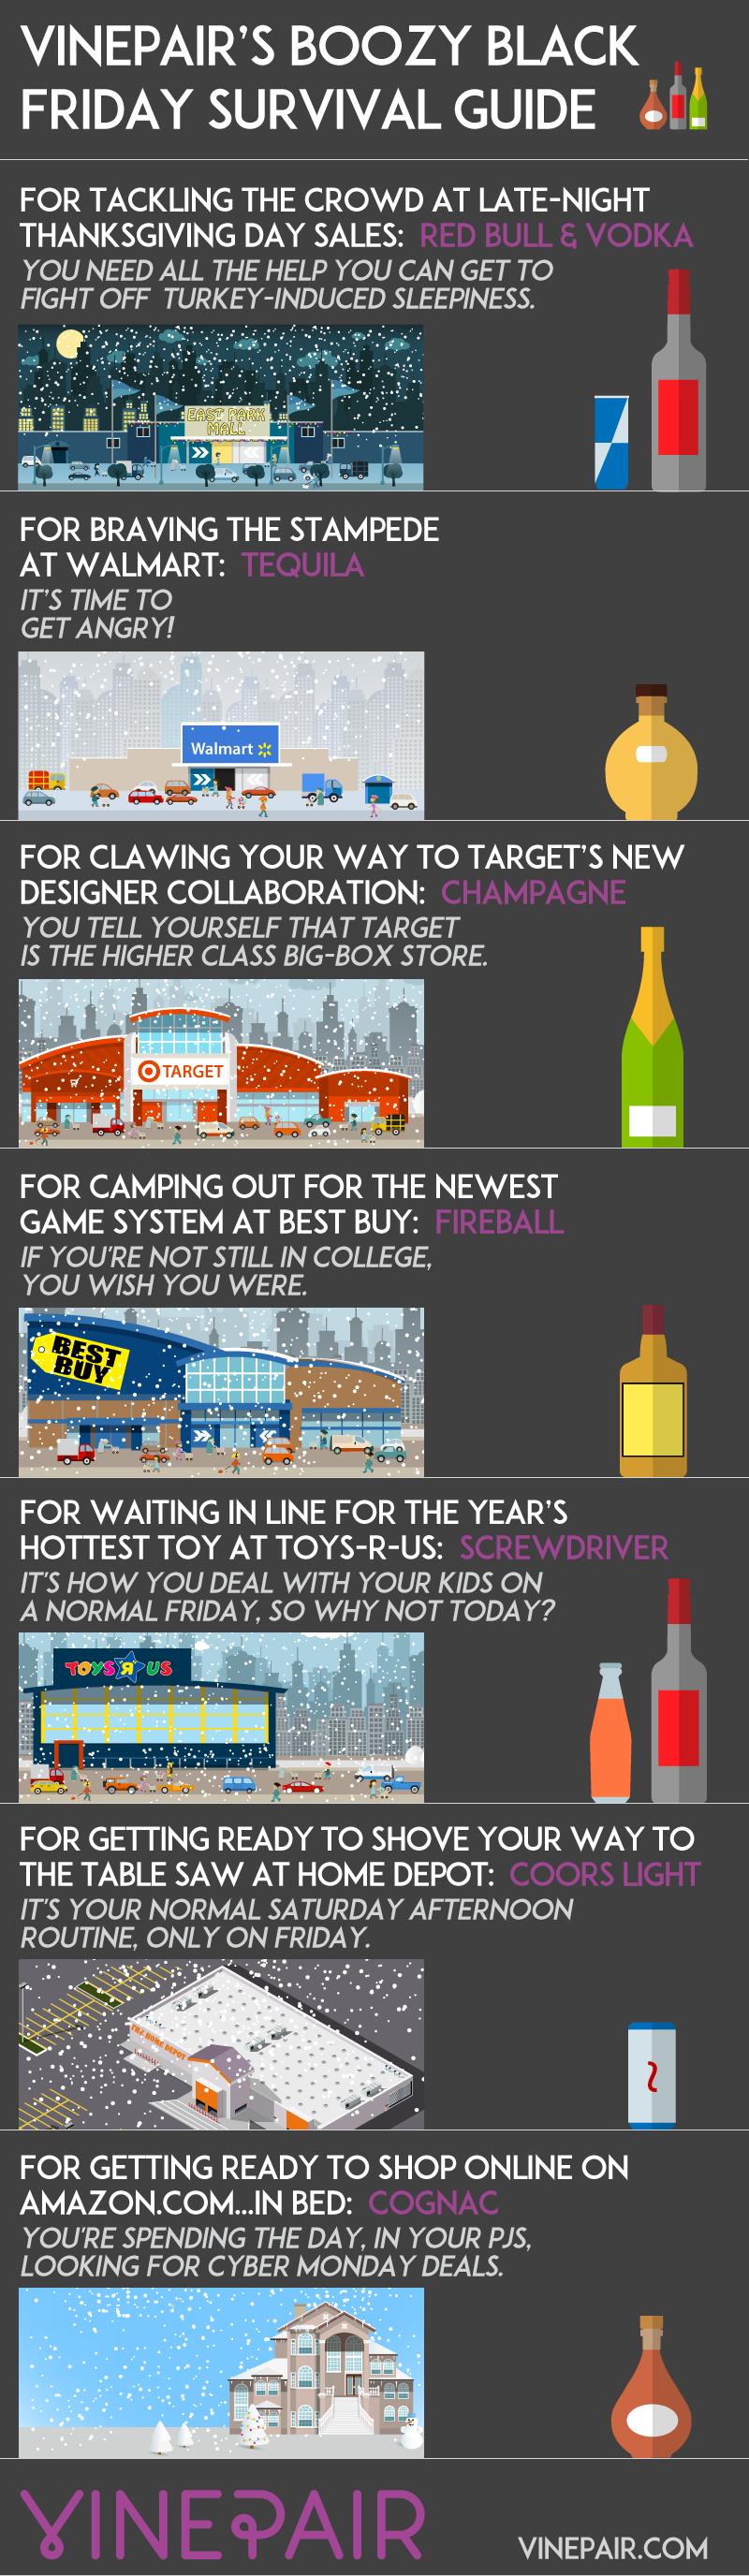 The Boozy Black Friday Survival Guide - 7 Drink Pairings - Infographic